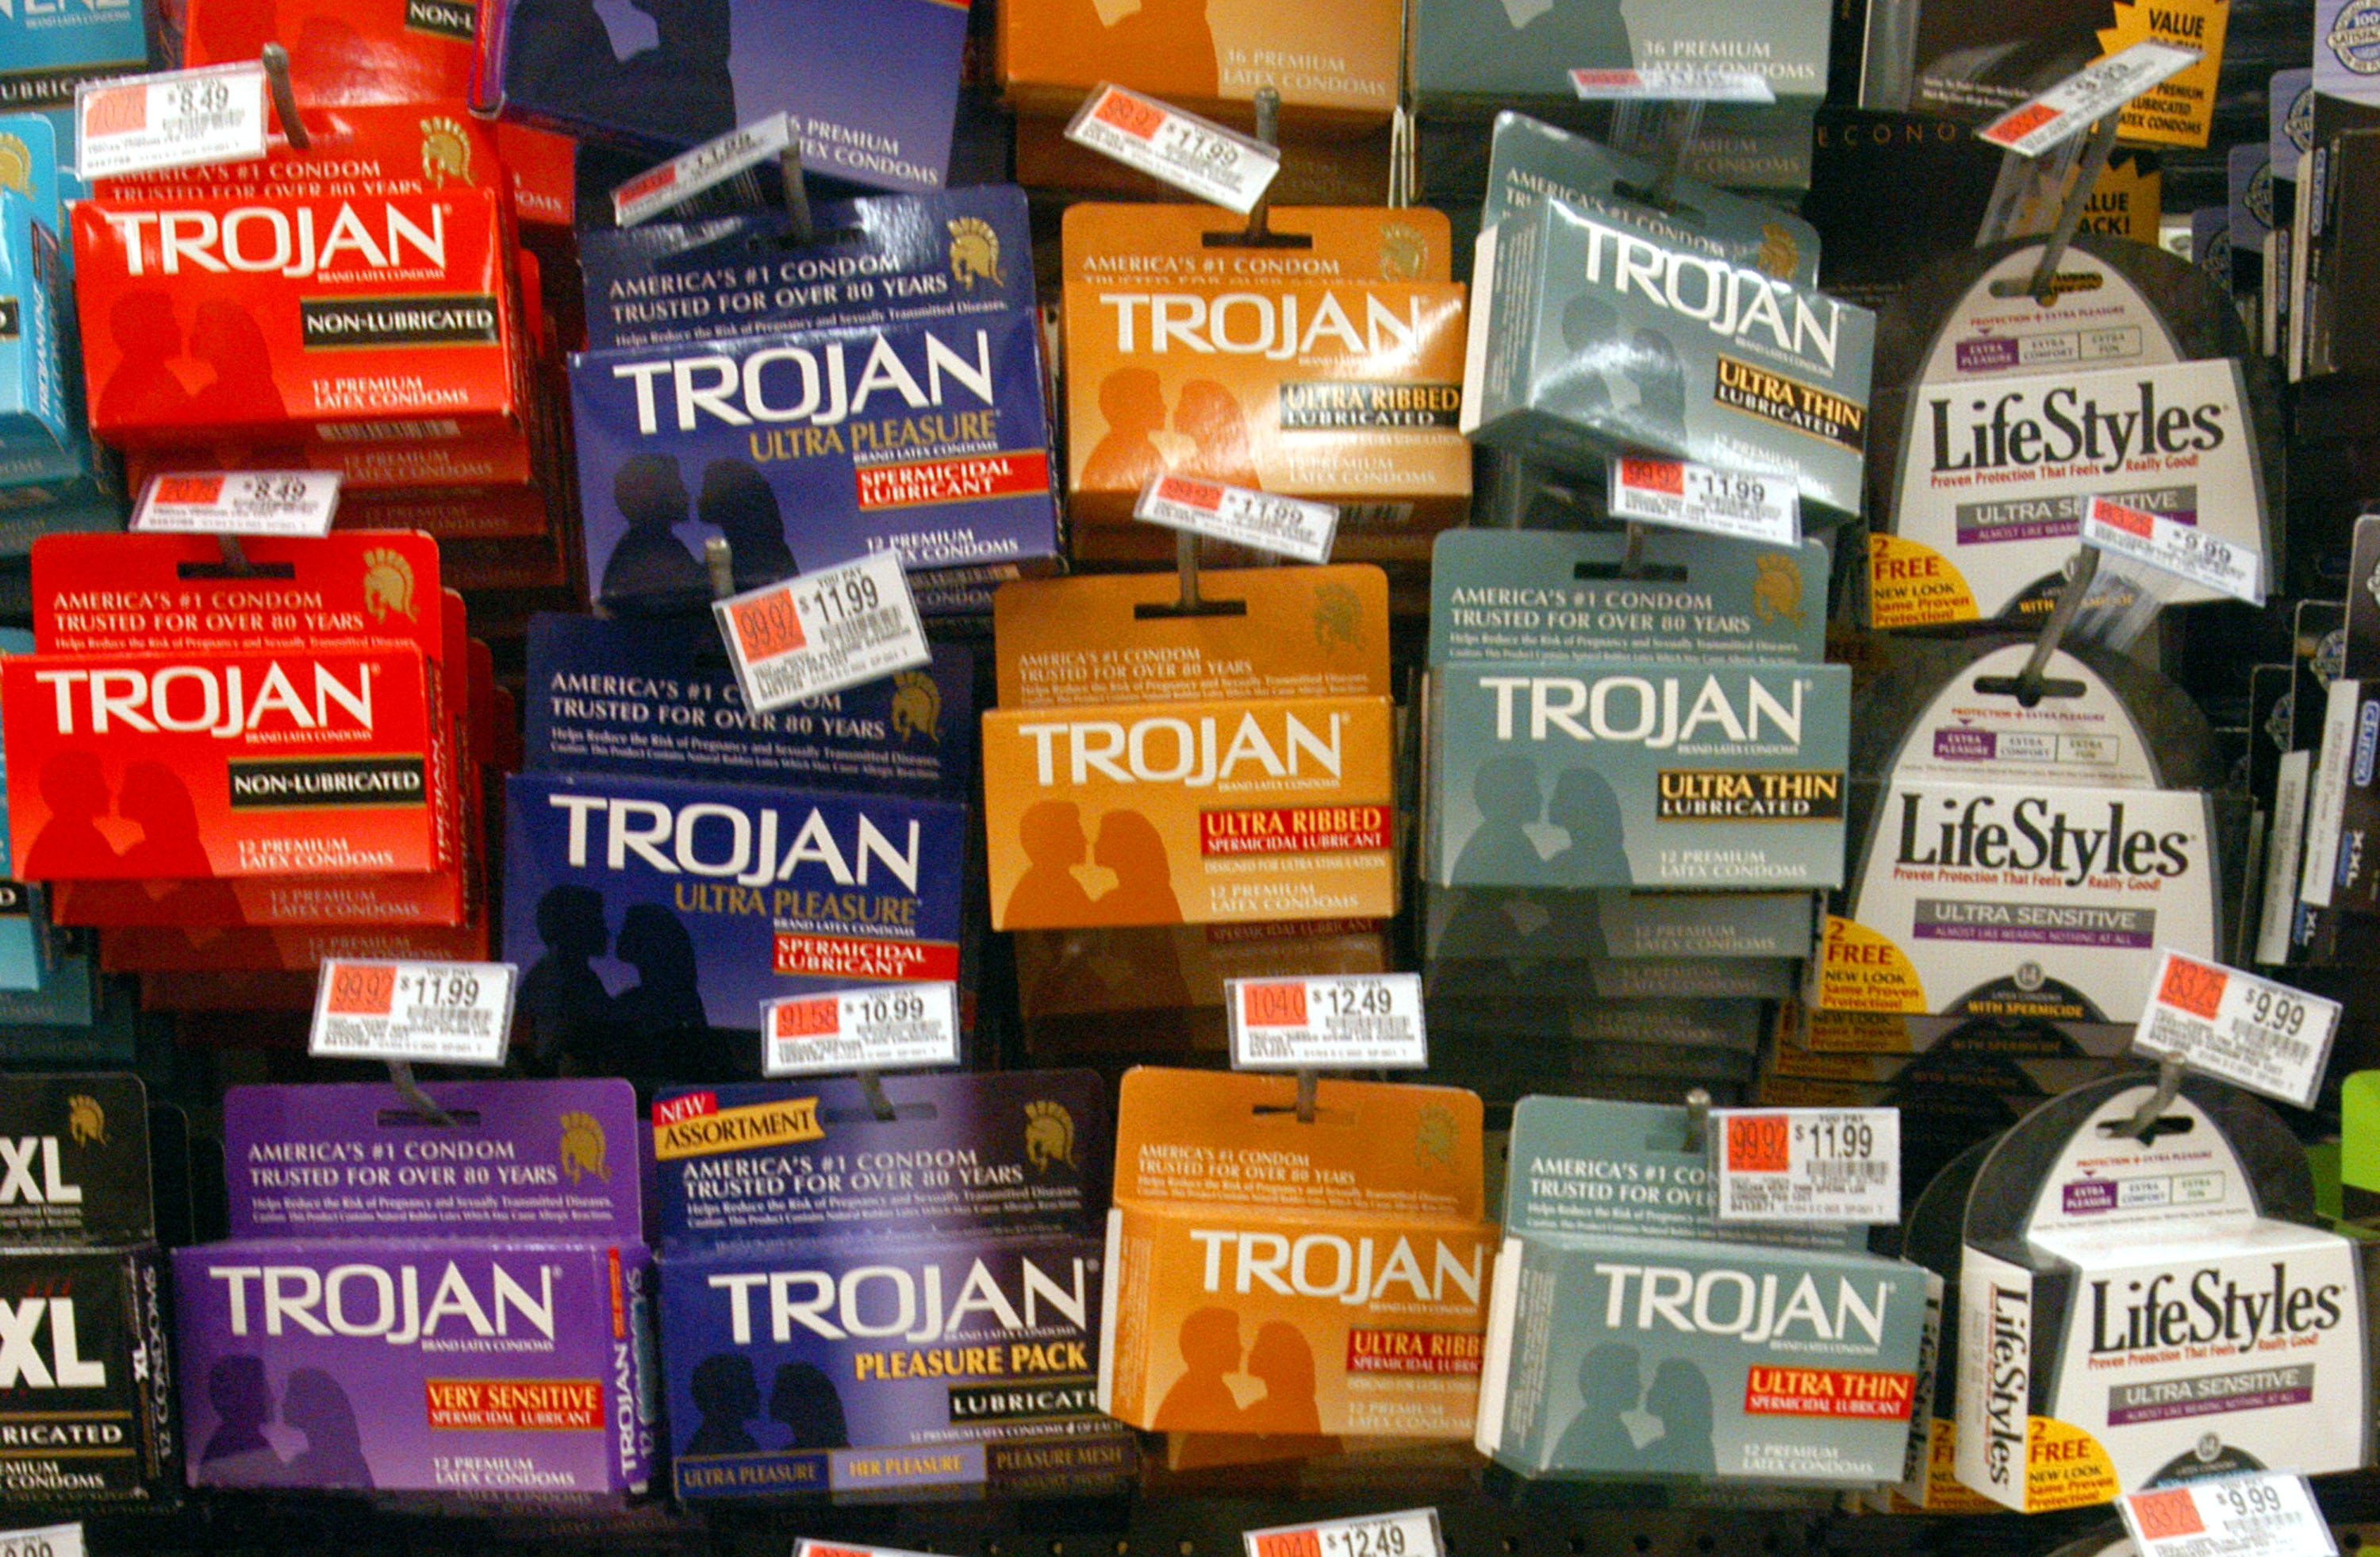 California Stealthing Law Would Make It Illegal To Remove A Condom